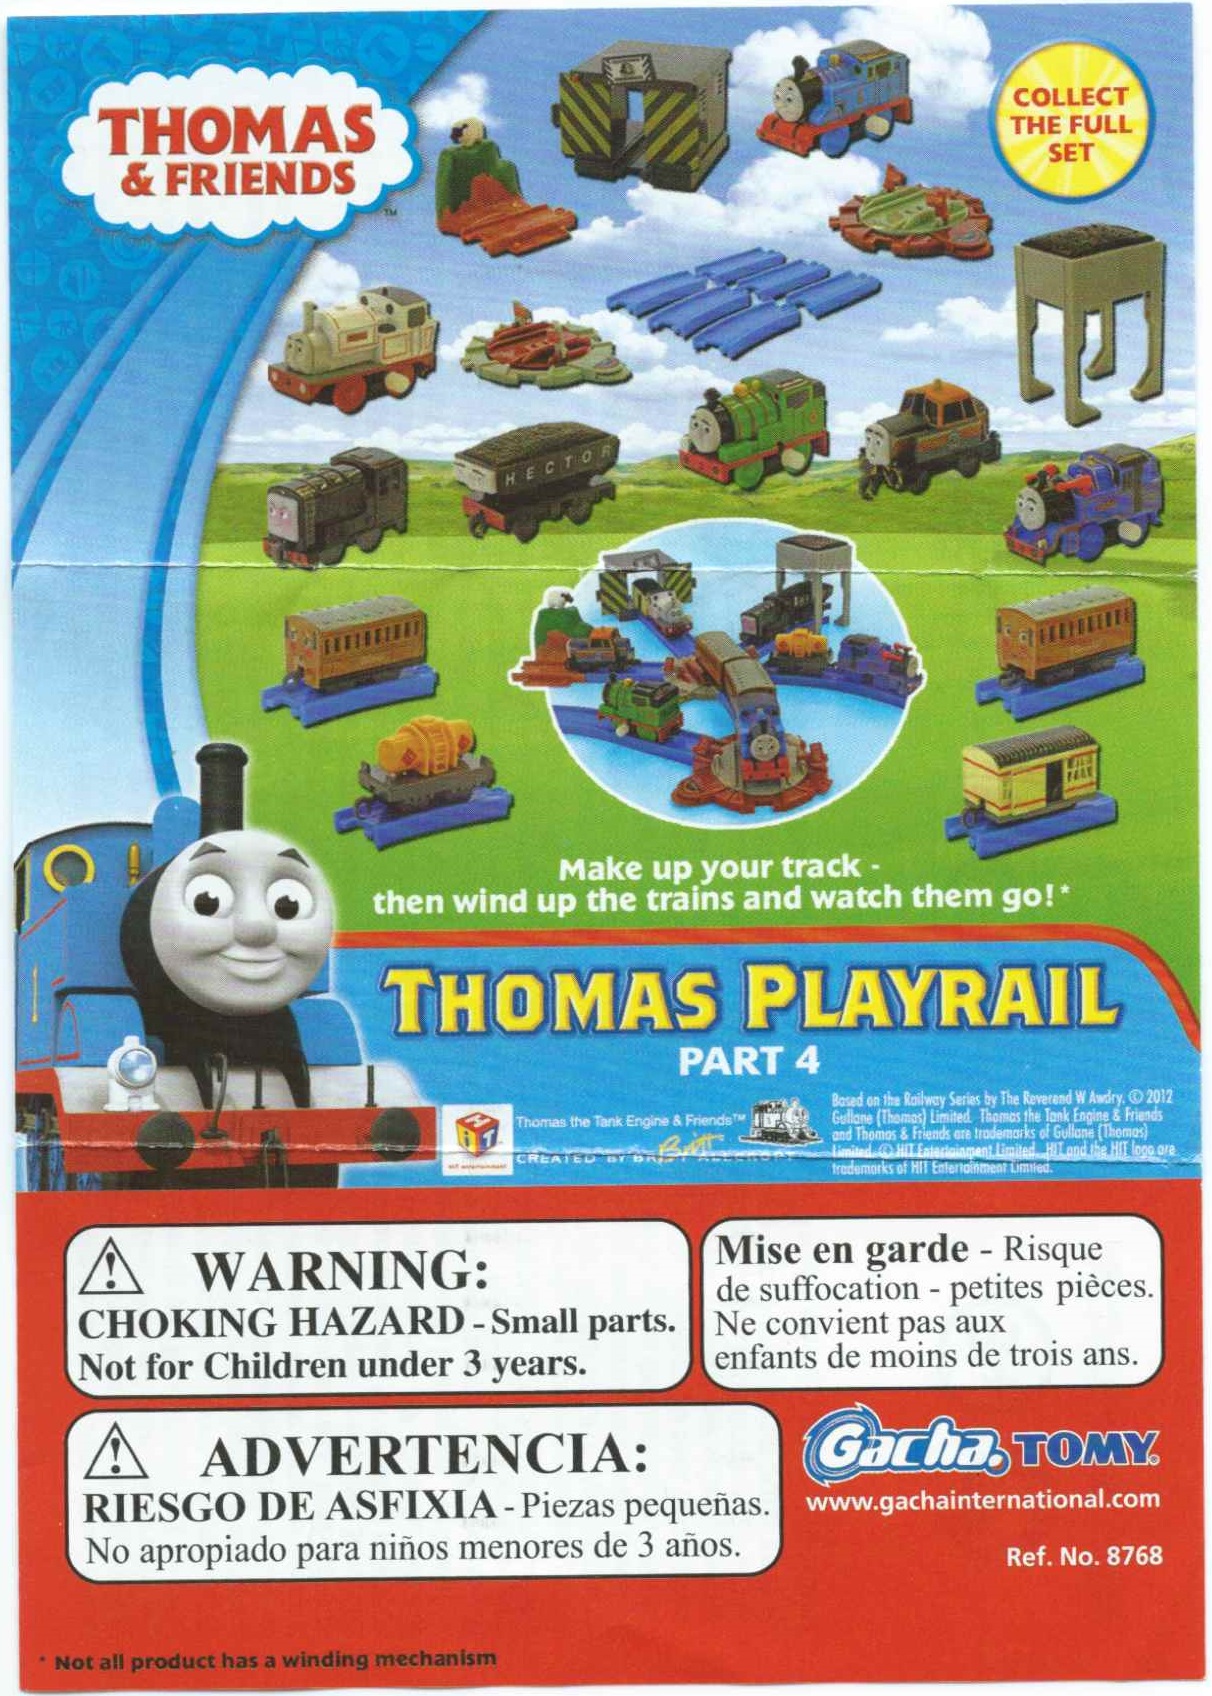 Details about   No Longer in Production THOMAS and FRIENDS PLARAIL TOMY Talking in Japanese OT01 